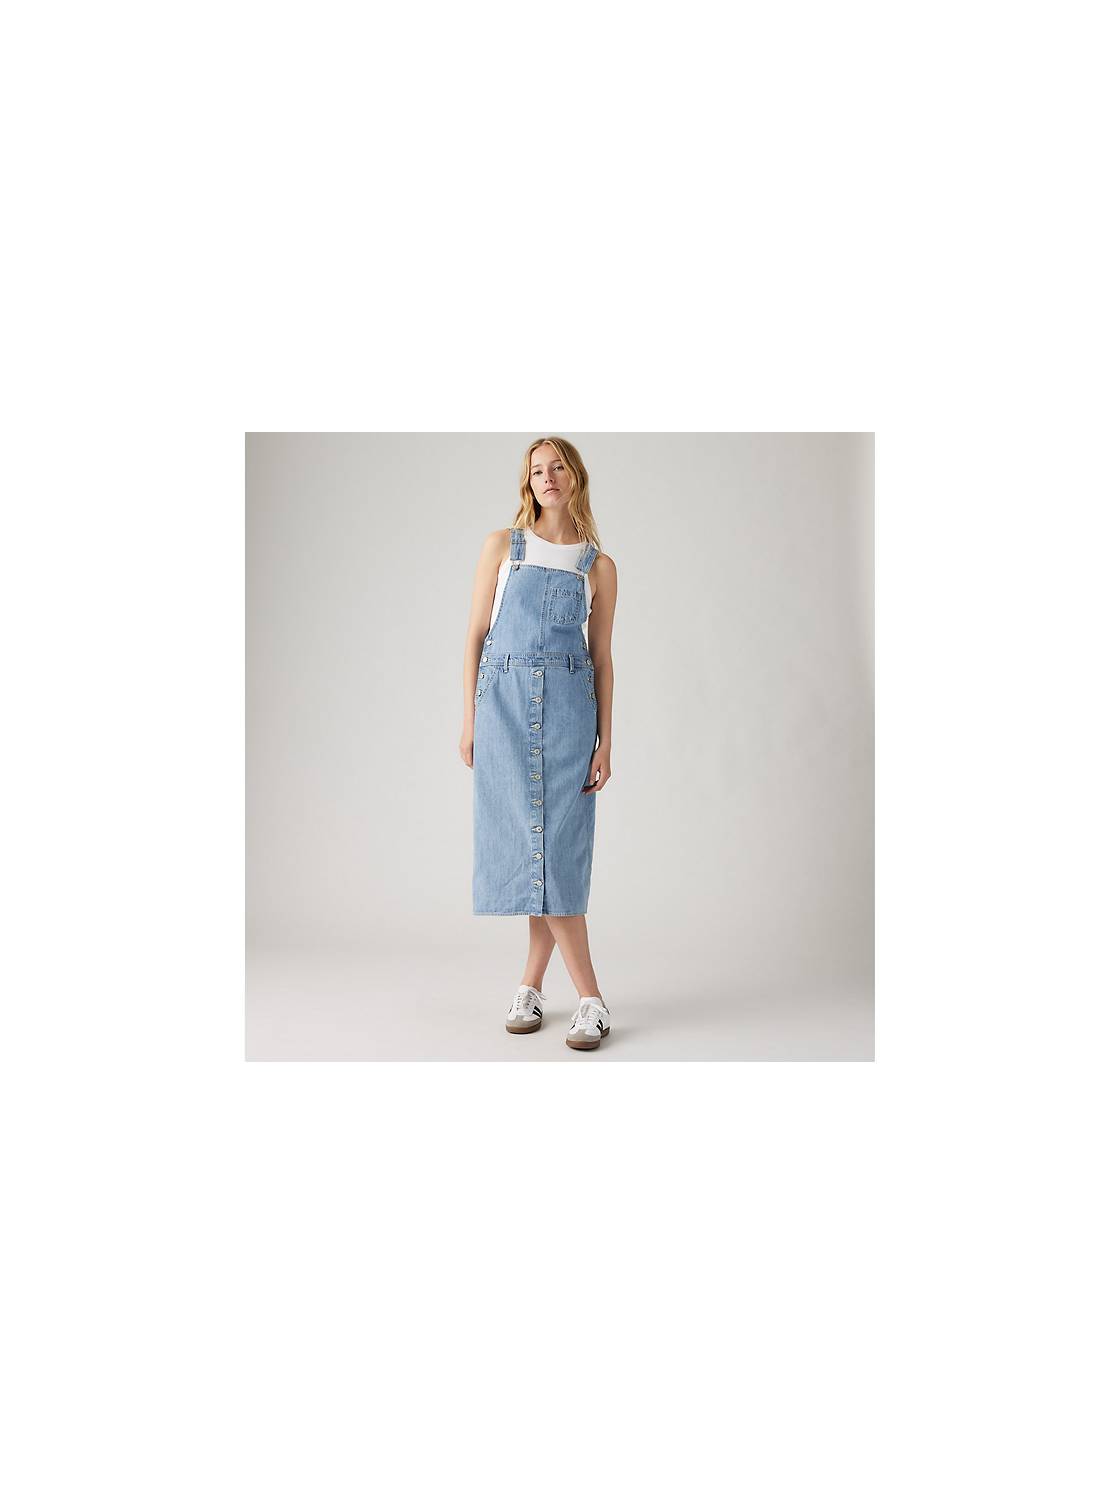 Capris Or Skirts Dungarees Women - Buy Capris Or Skirts Dungarees